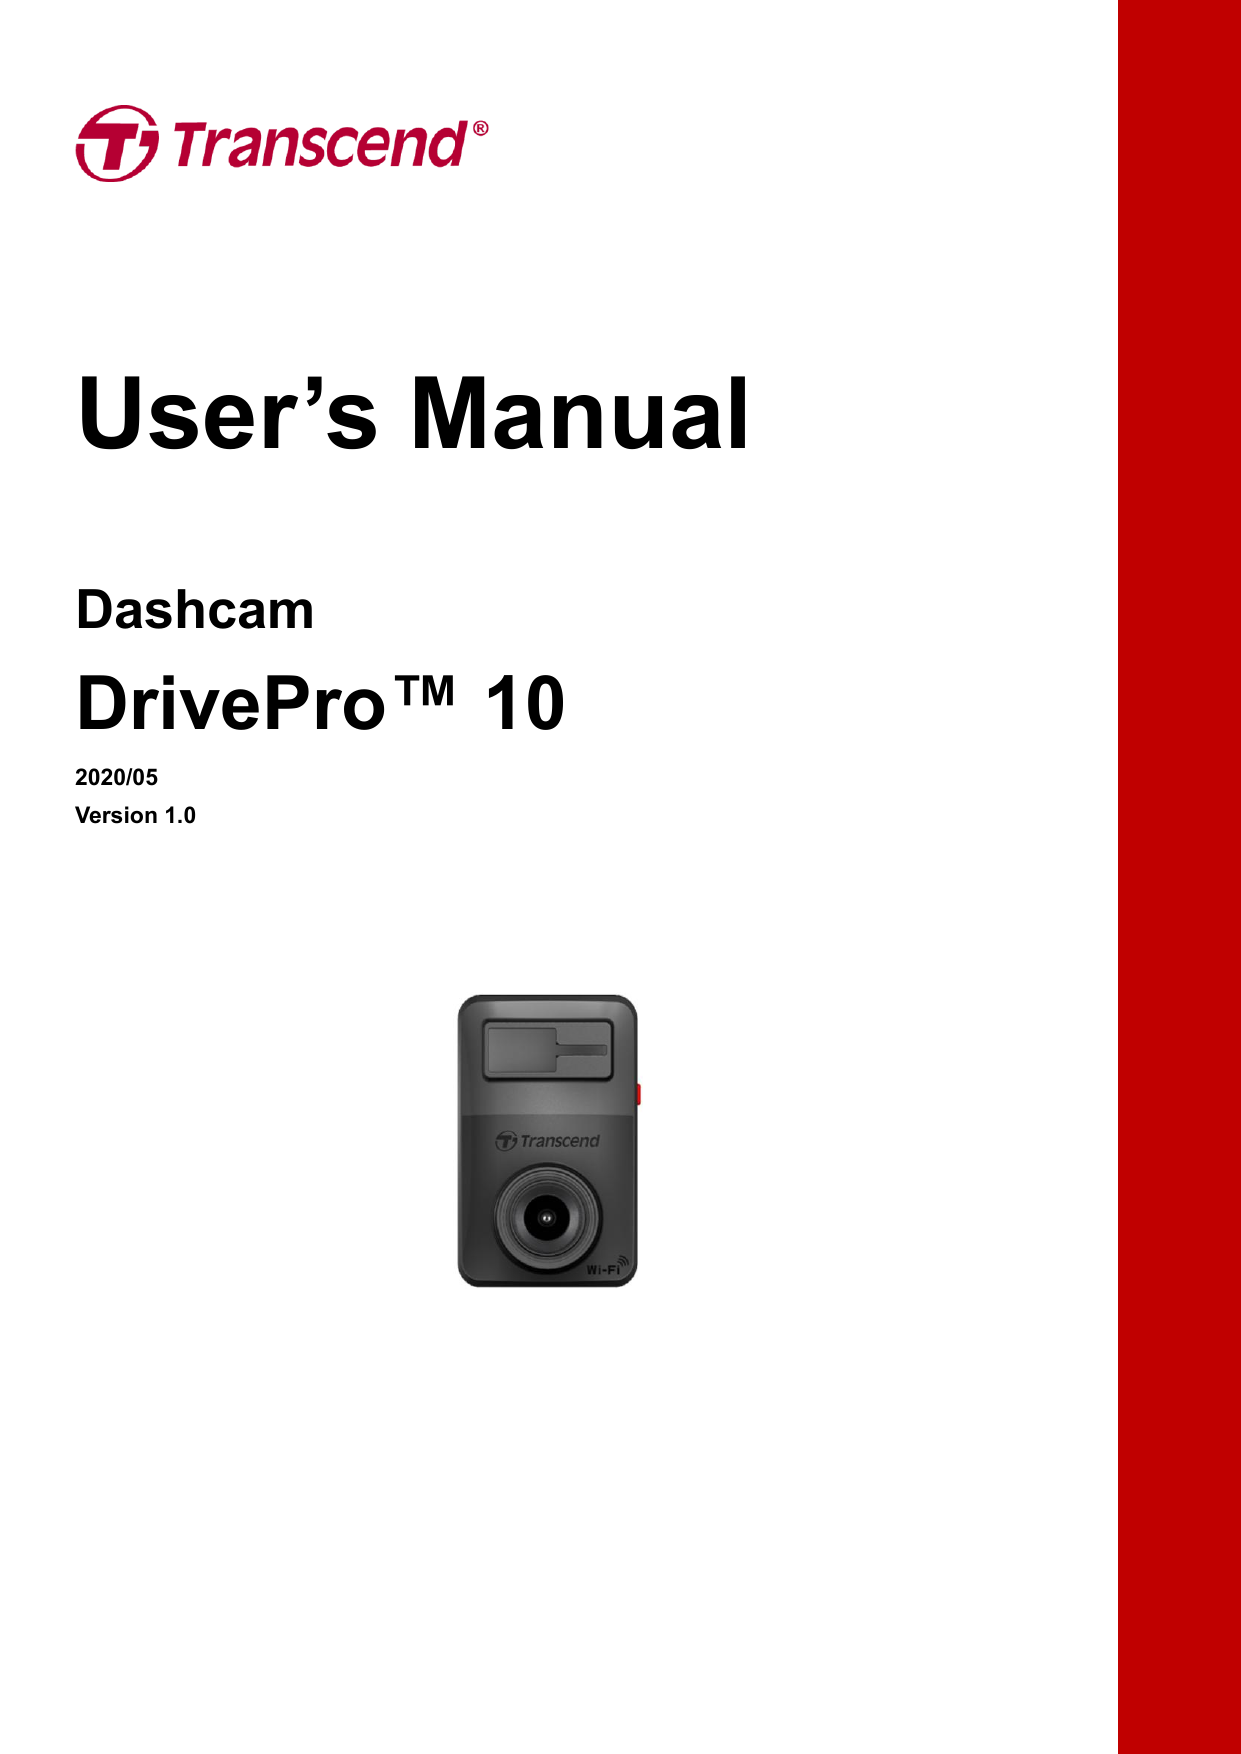 drivepro toolbox software download